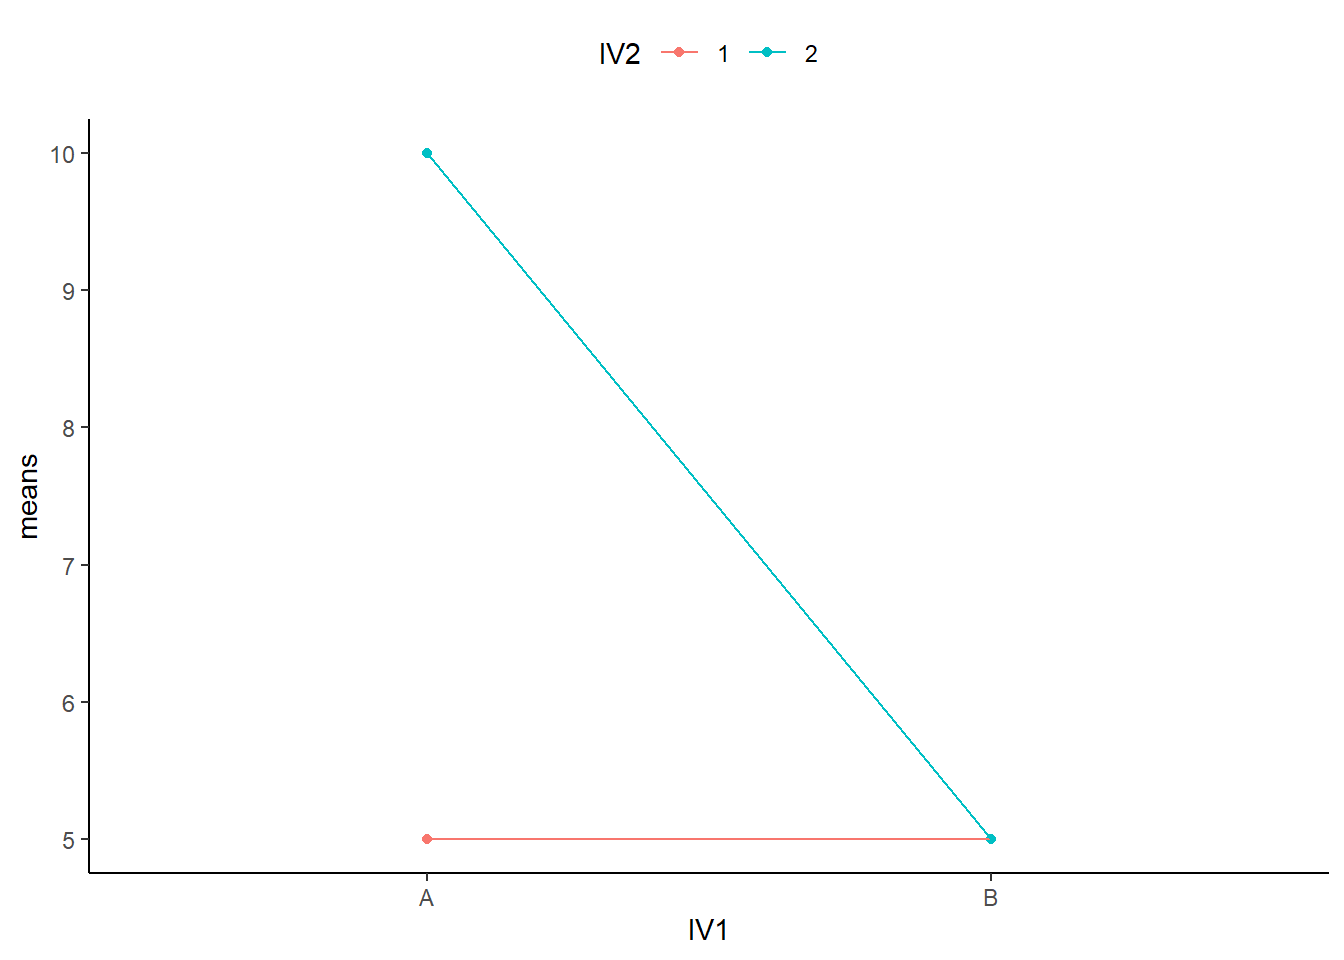 Example data showing how an interaction exists, and a main effect does not, even though the means for the main effect may show a difference